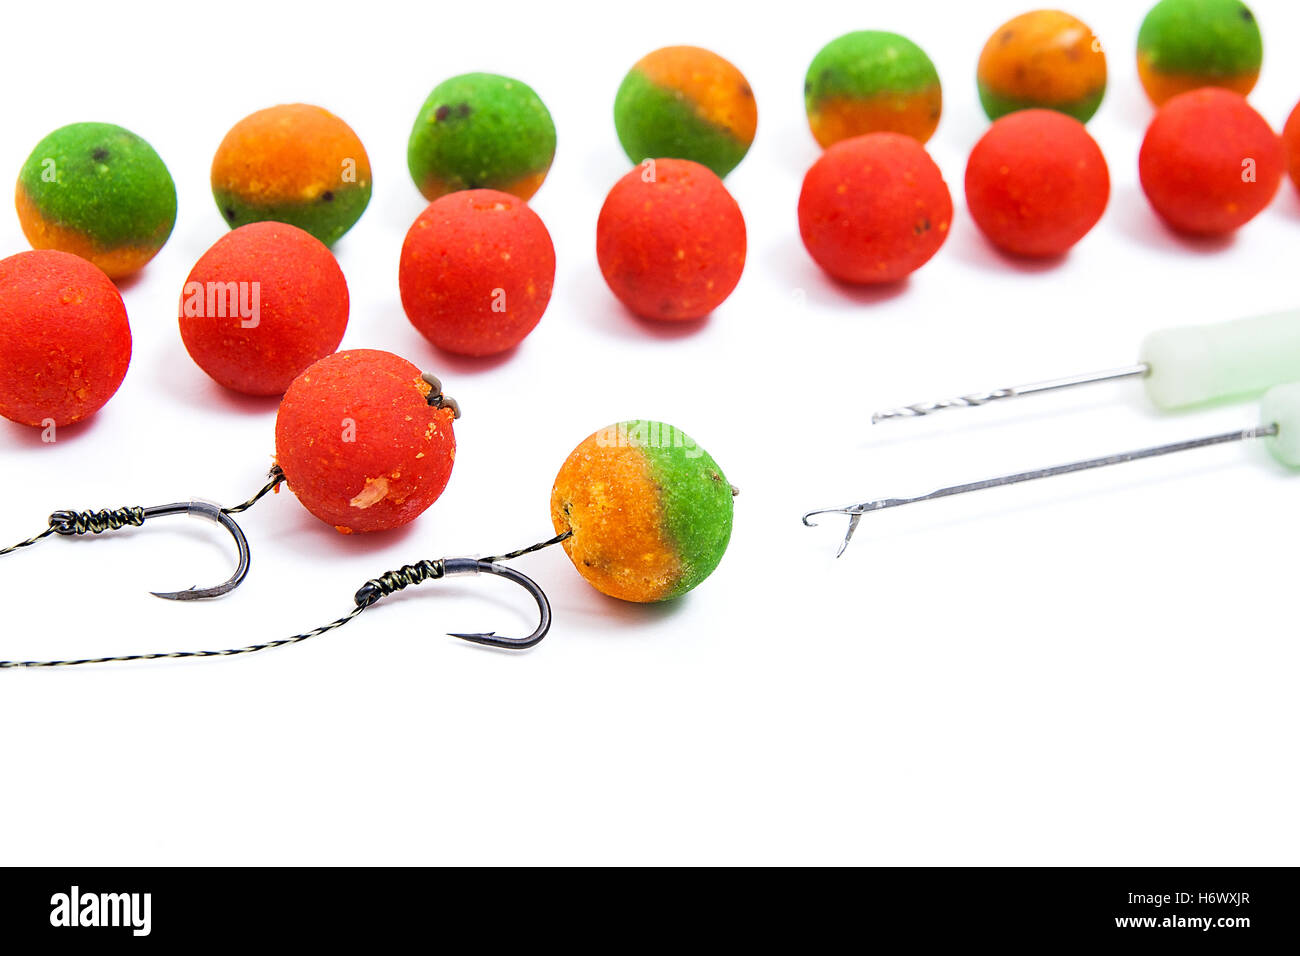 Close up view of fishing baits and Fishing gear for carp